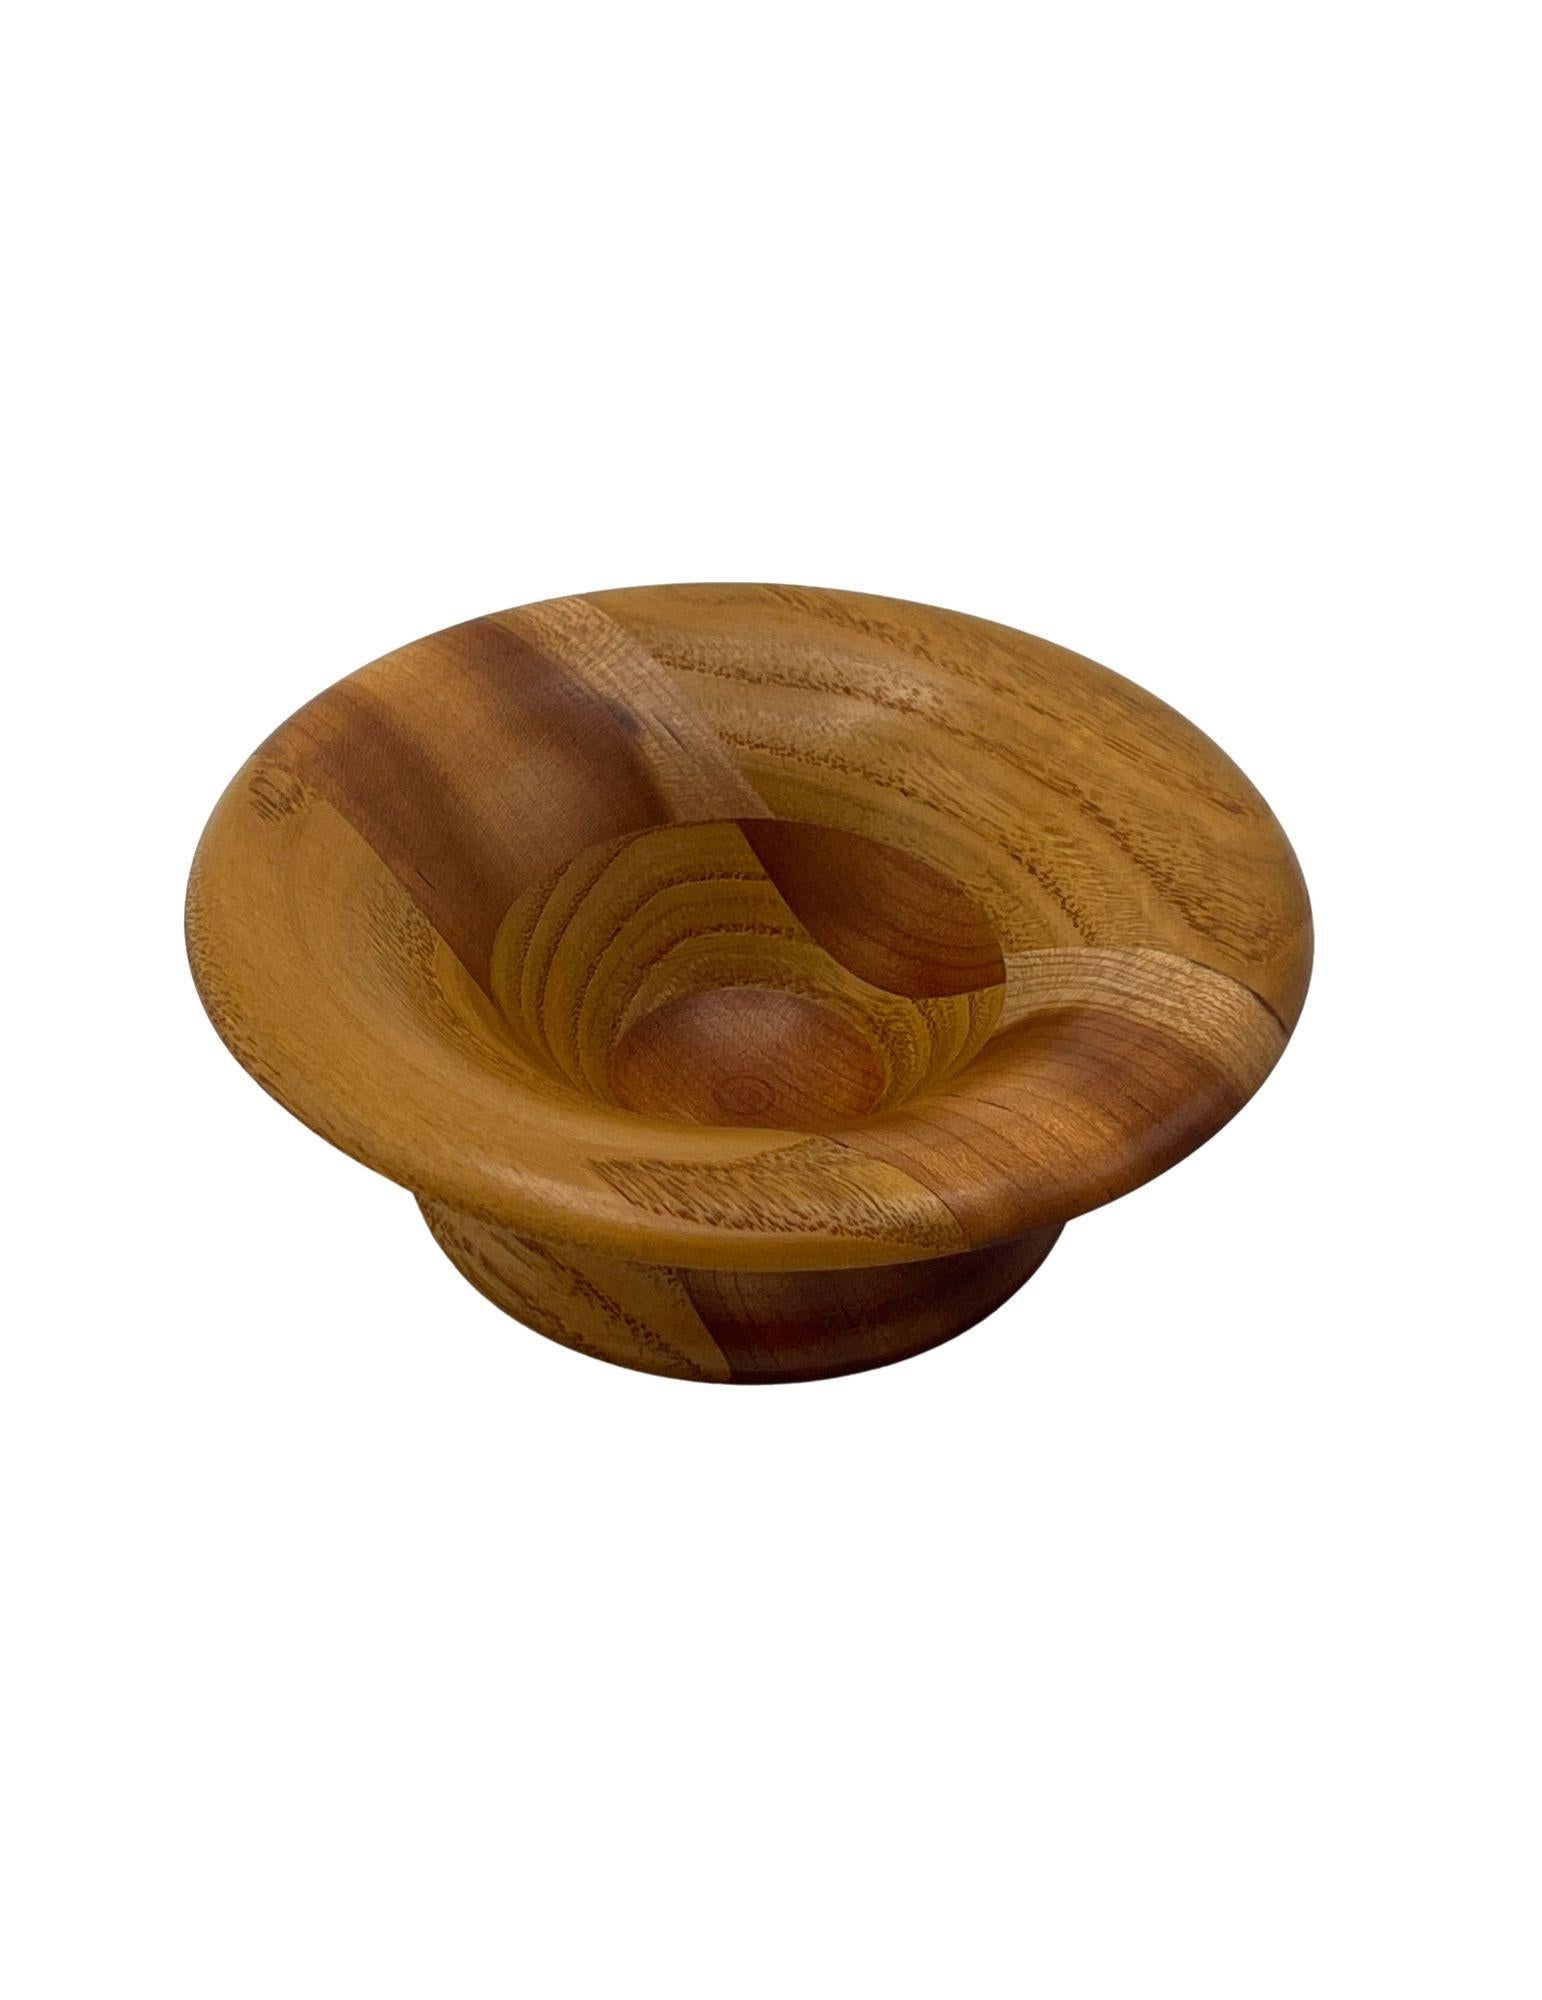 Contemporary Handcrafted Turned Wooden Bowl by Franz Woodworks For Sale